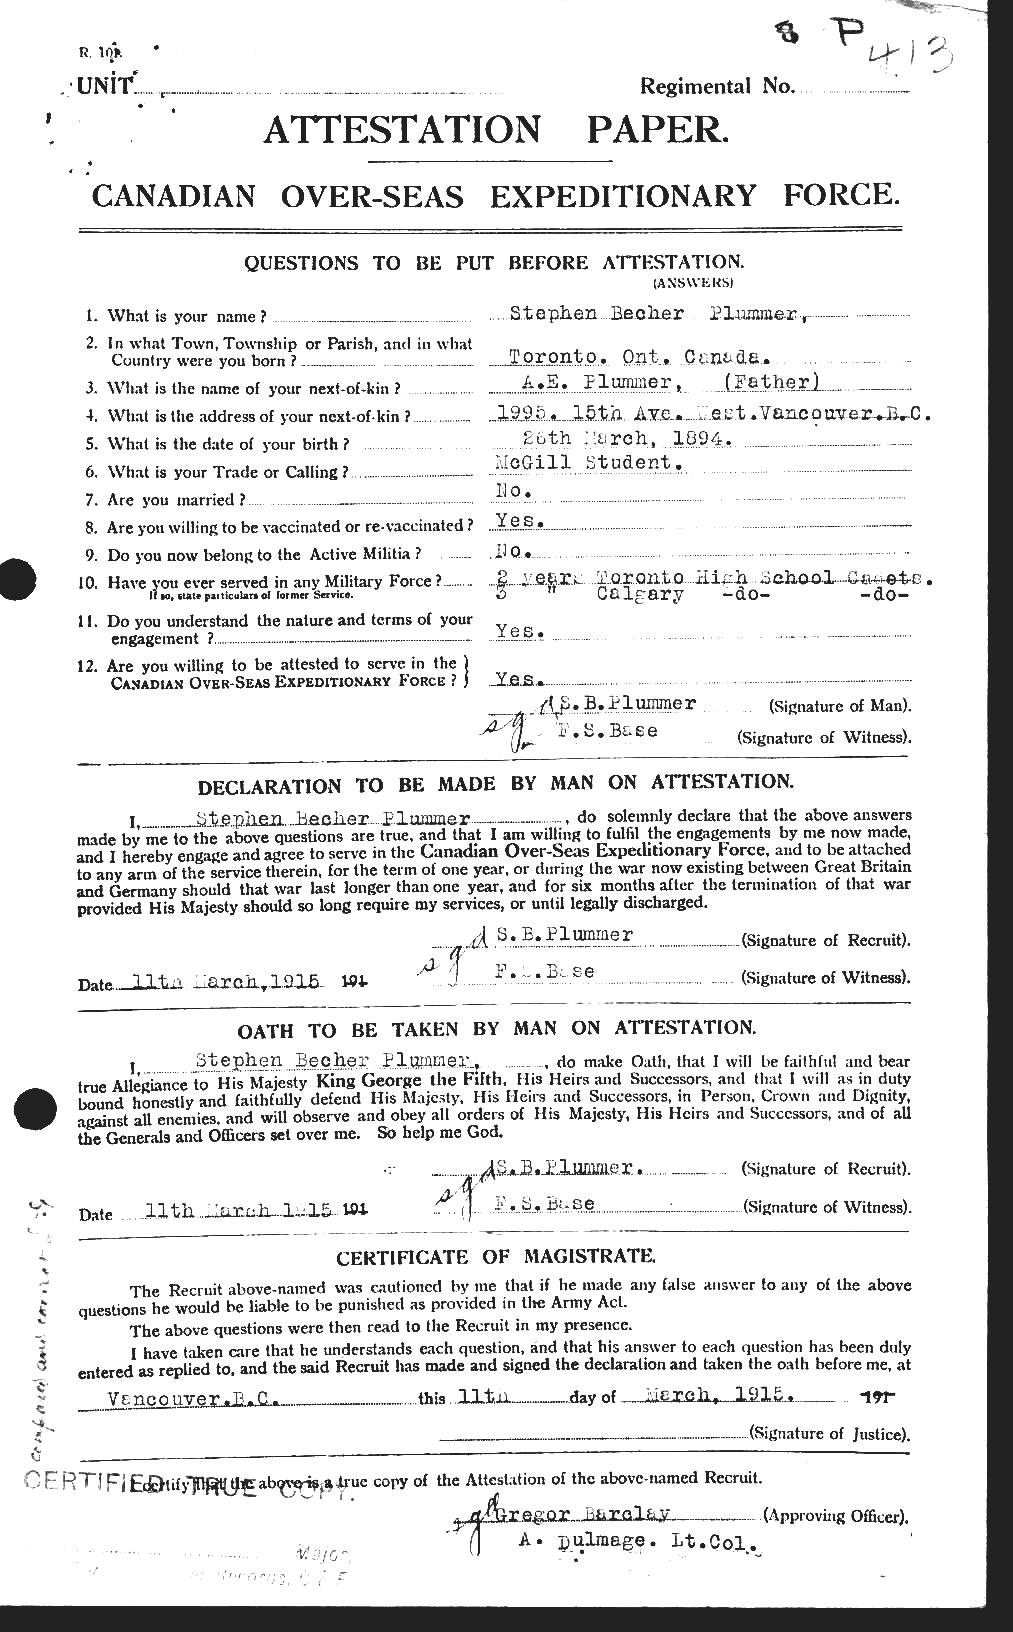 Personnel Records of the First World War - CEF 578550a